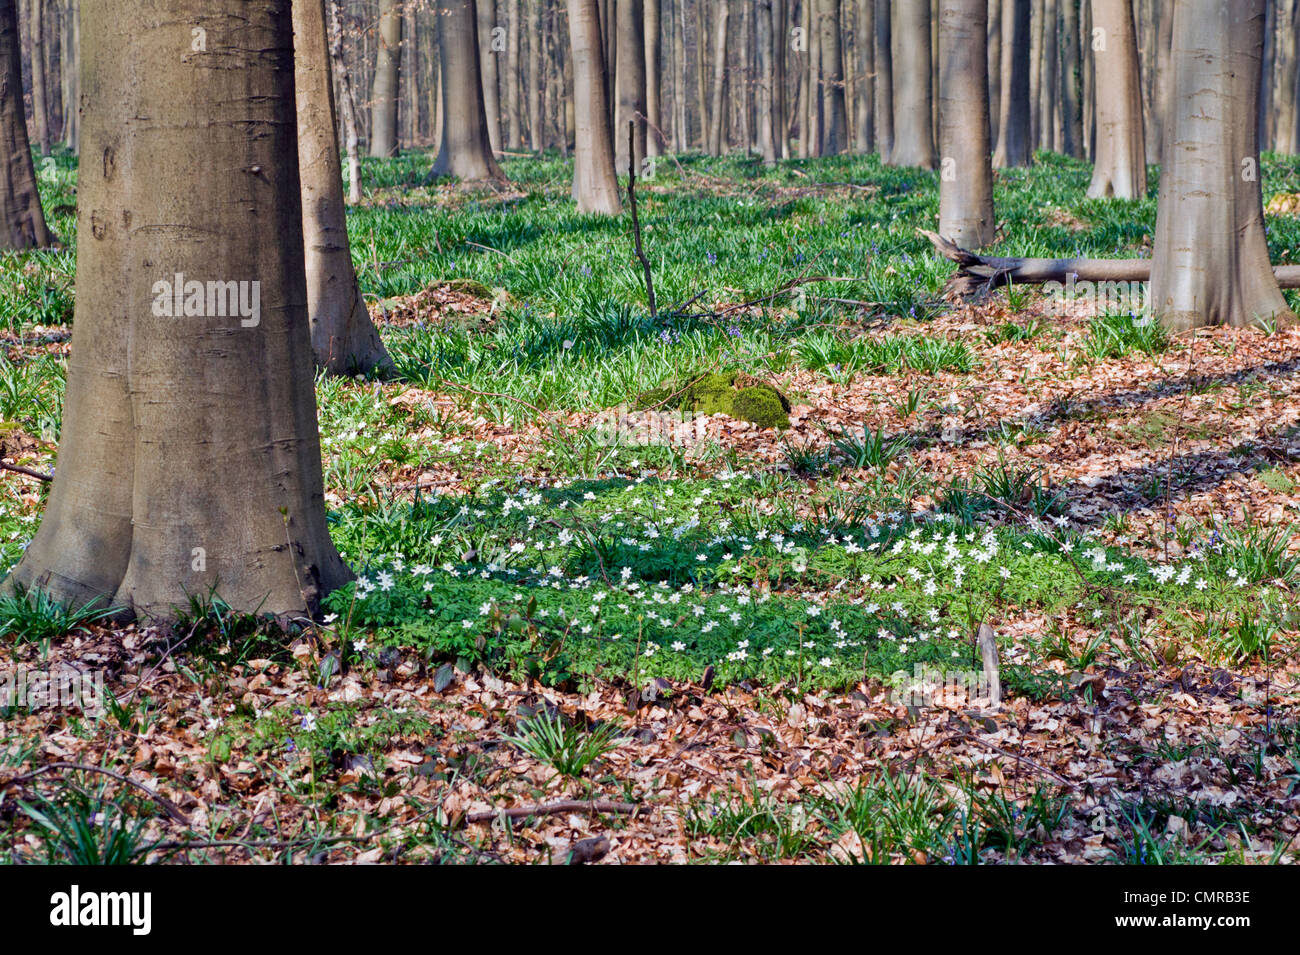 Haller forest in Belgium with white forest anemone blooming Stock Photo